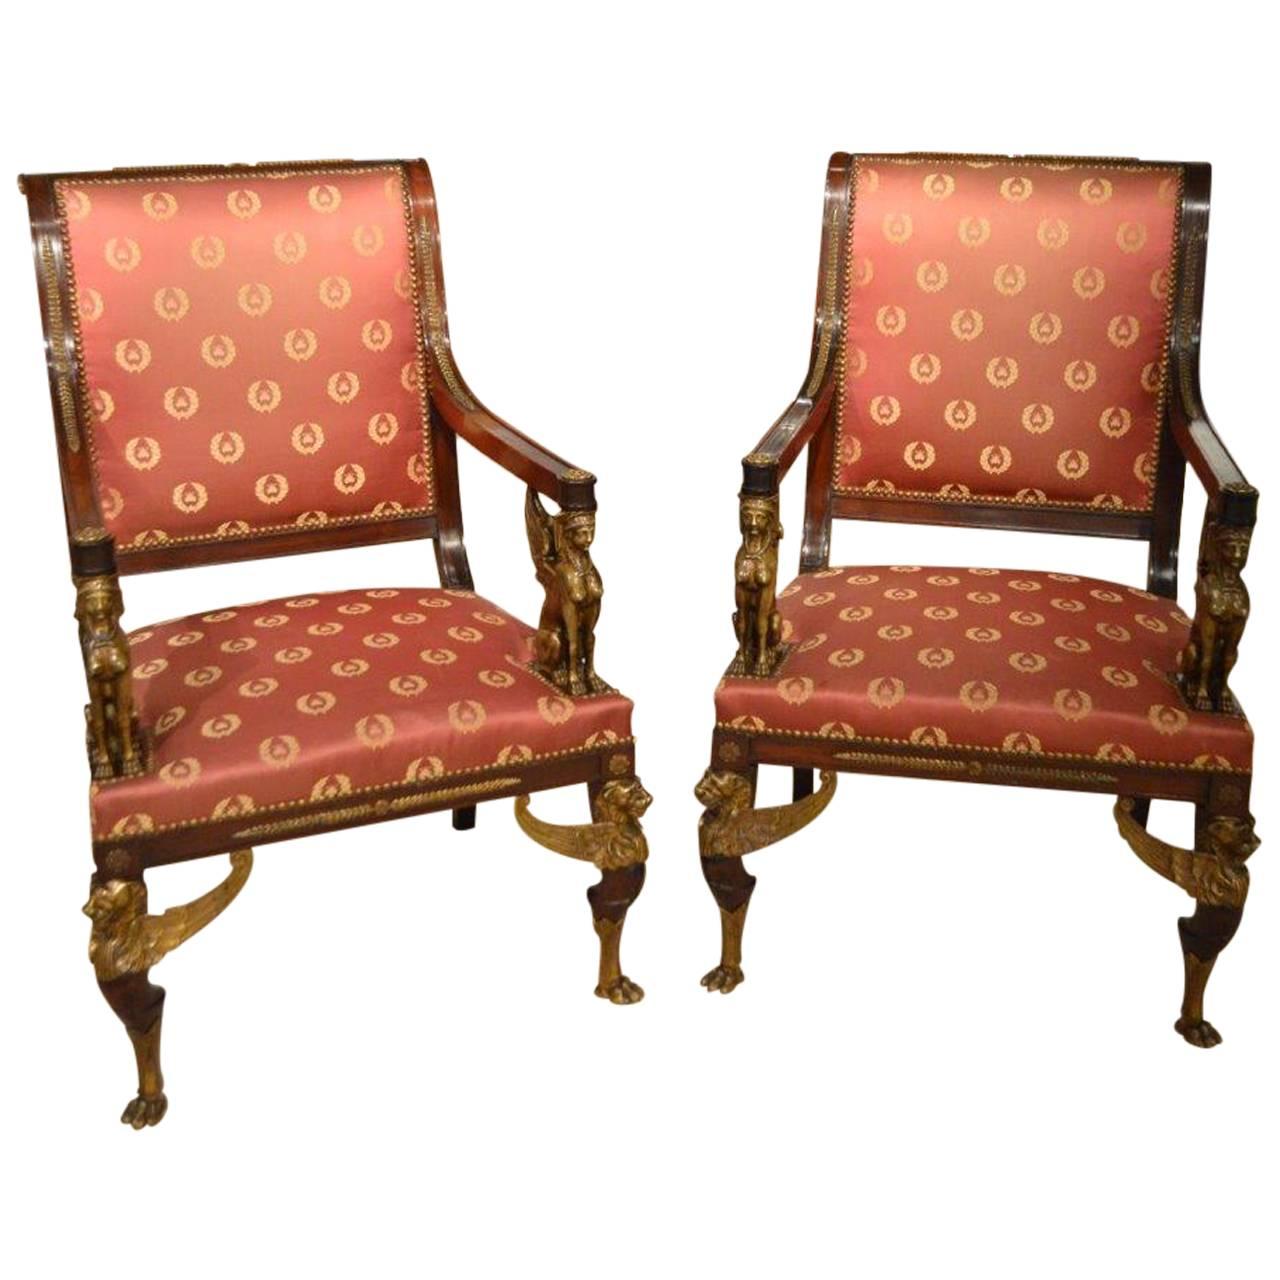 A fine pair of French Empire Revival mahogany & ormolu library chairs. 